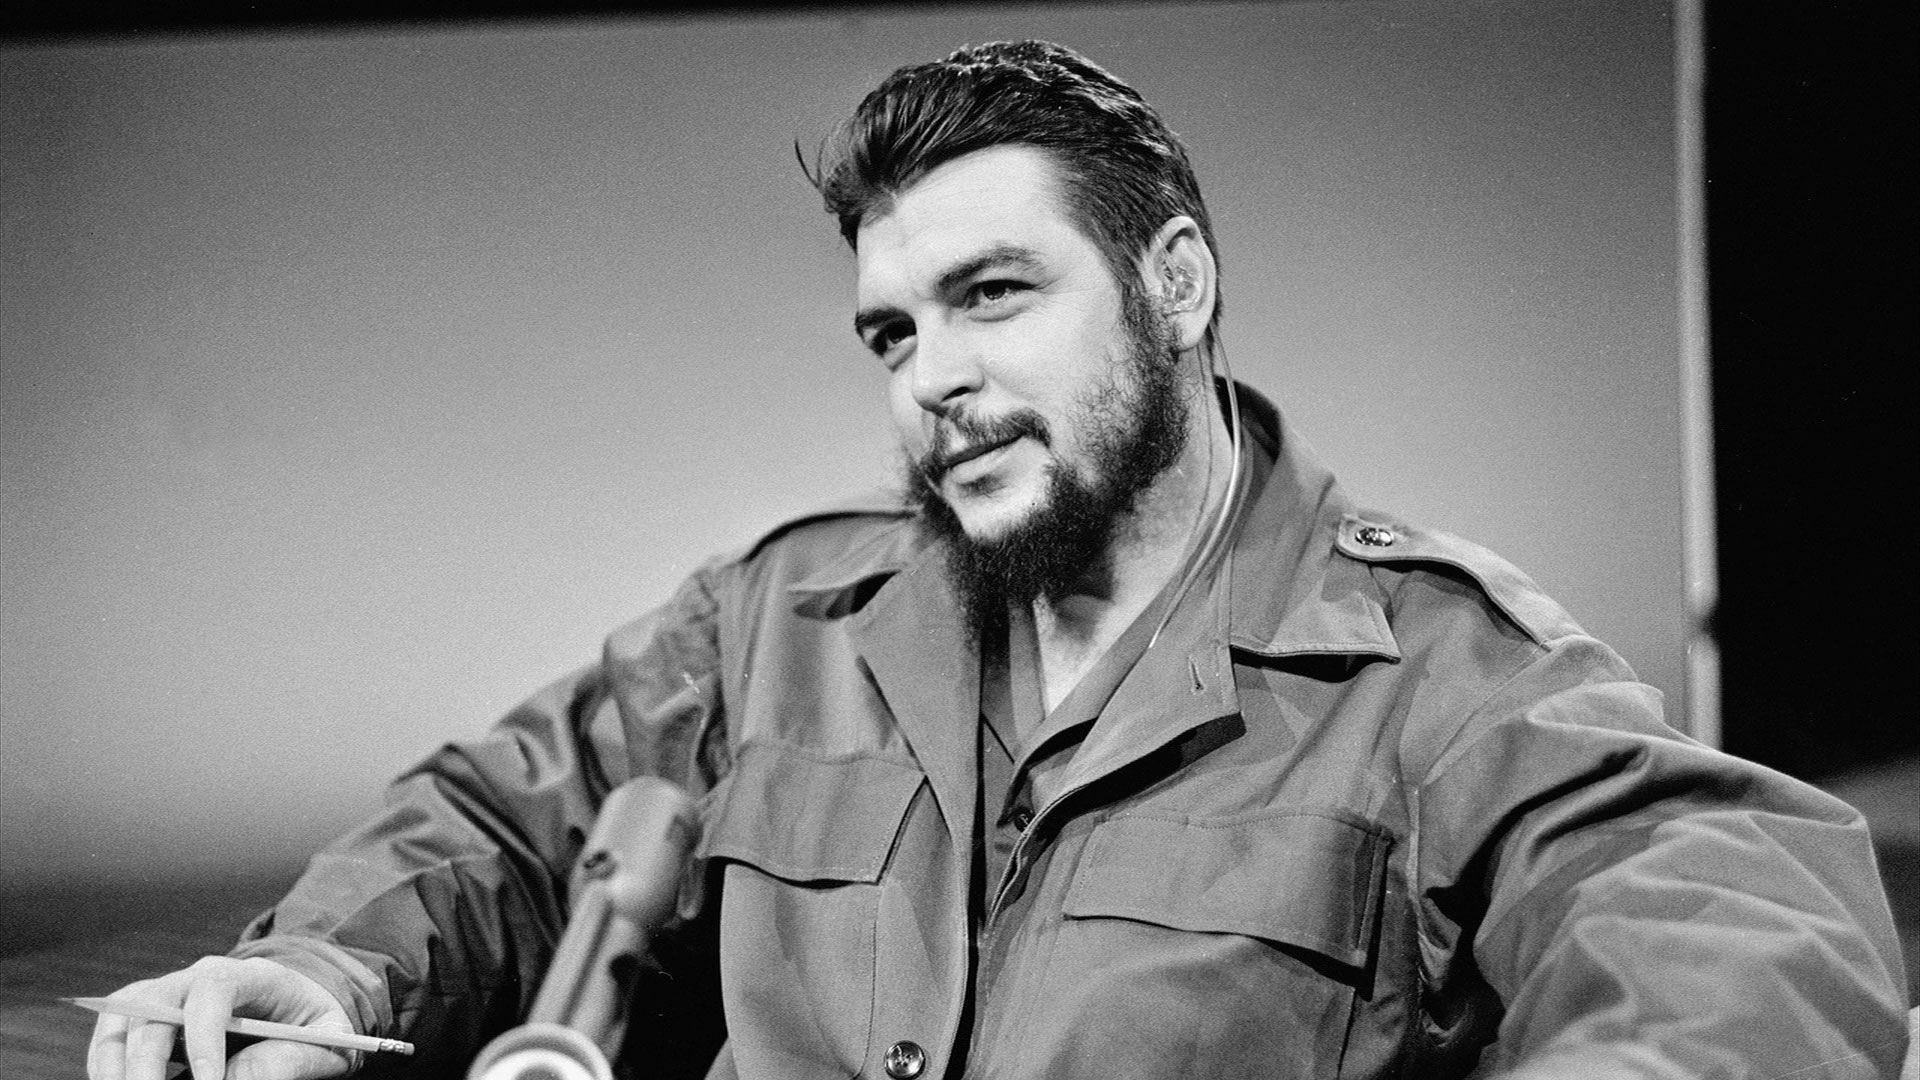 Che Guevara - Facts, Biography & Legacy